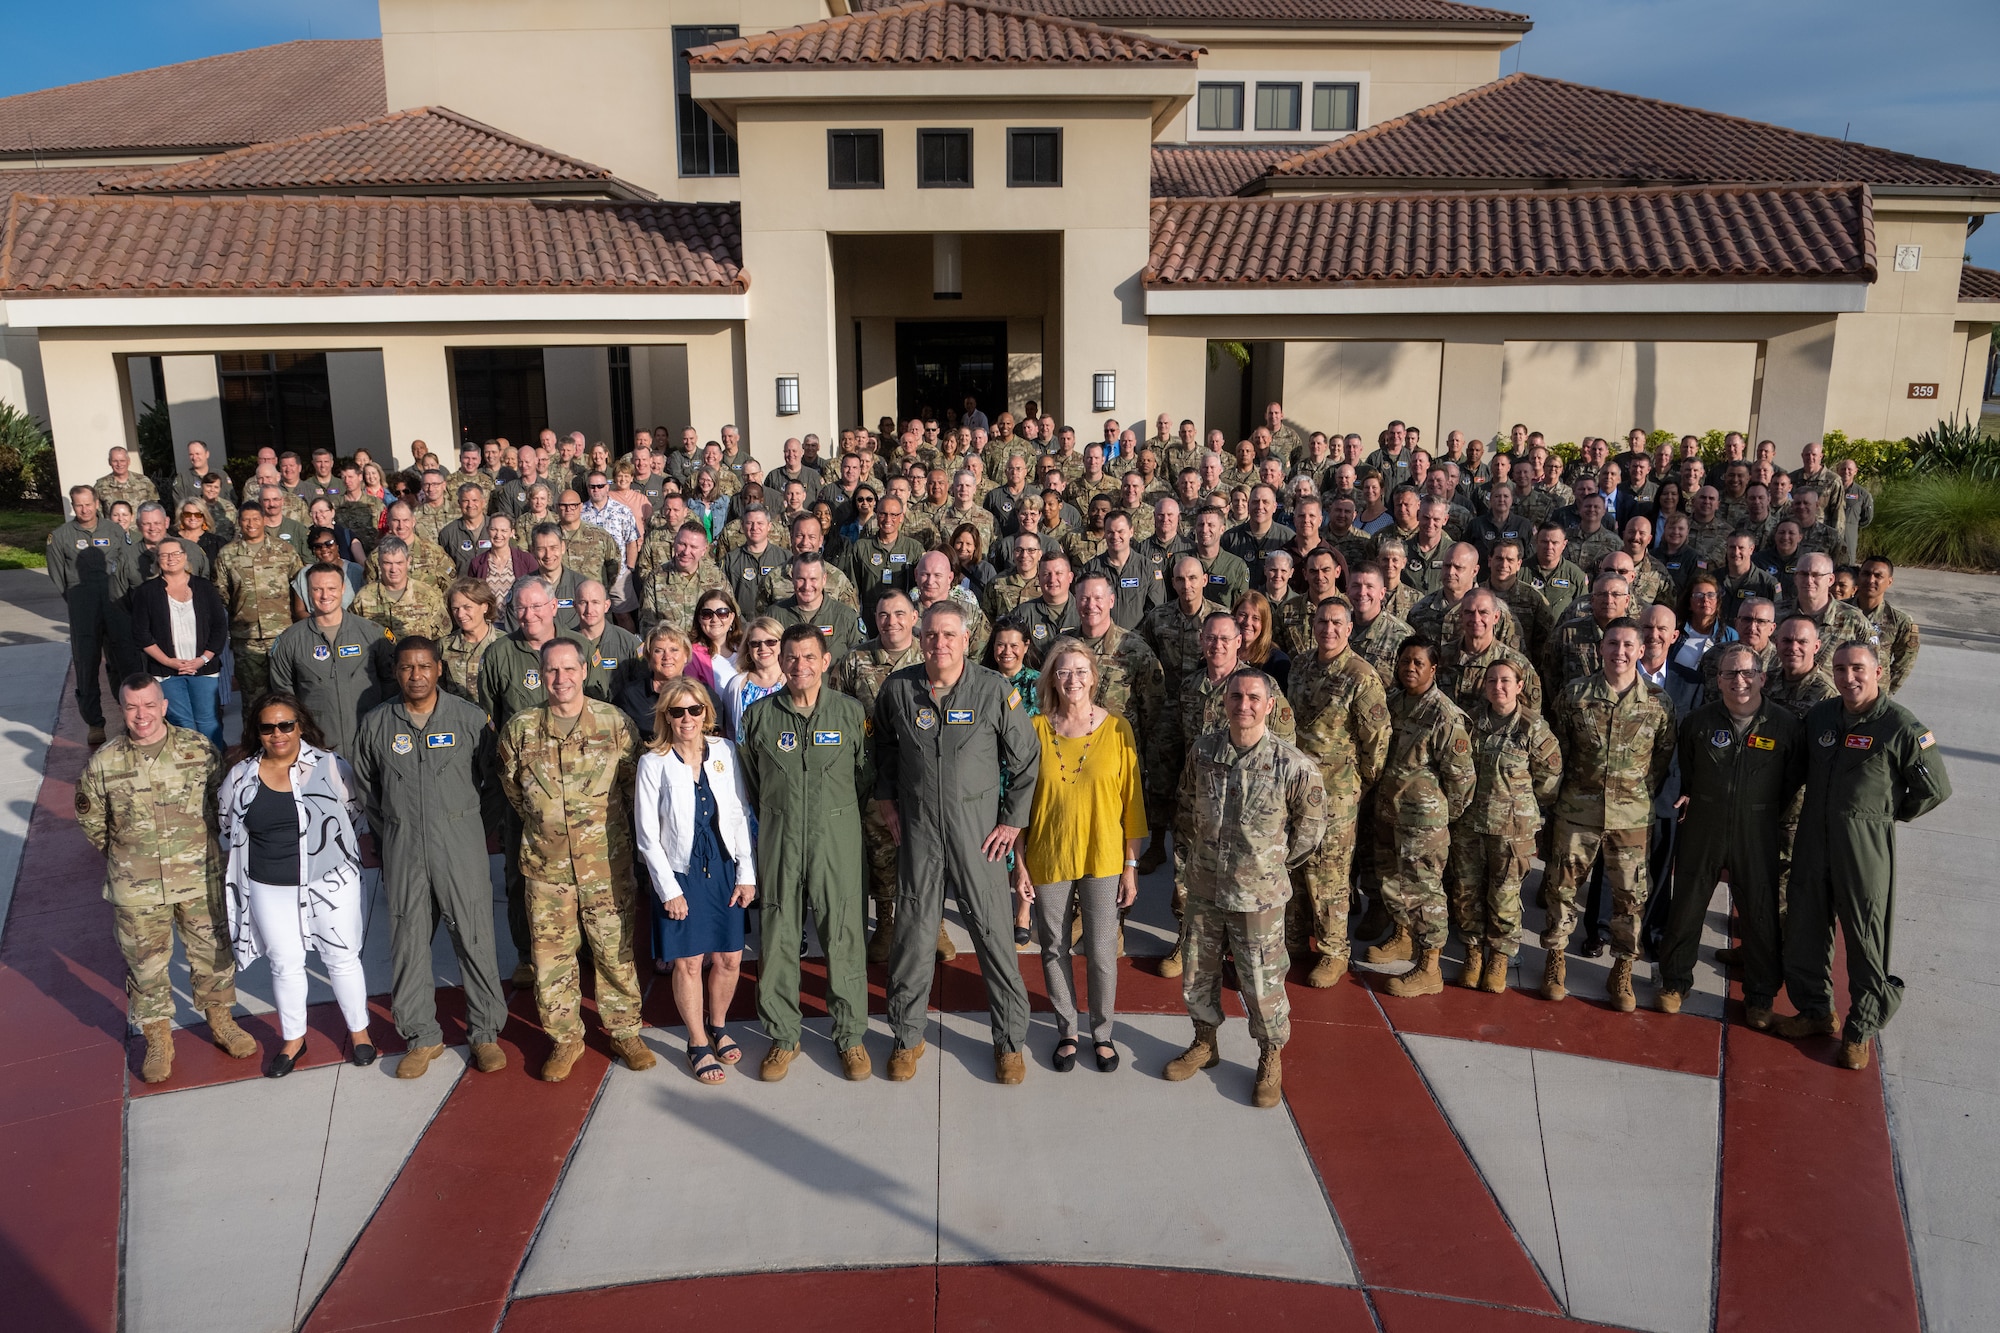 Total Force Mobility Air Force leaders pose for a group photo during Phoenix Rally at MacDill Air Force Base, Florida, April 19, 2023. Spring Phoenix Rally brought together more than 250 Total Force Mobility Air Force leaders and spouses to discuss Warrior Heart, Mobility Guardian ’23, Air Mobility Command's strategy and priorities, and how to work together to ensure the Mobility Air Force is ready to deliver Rapid Global Mobility across the Joint Force. (U.S. Air Force photo by Airman 1st Class Zachary Foster)